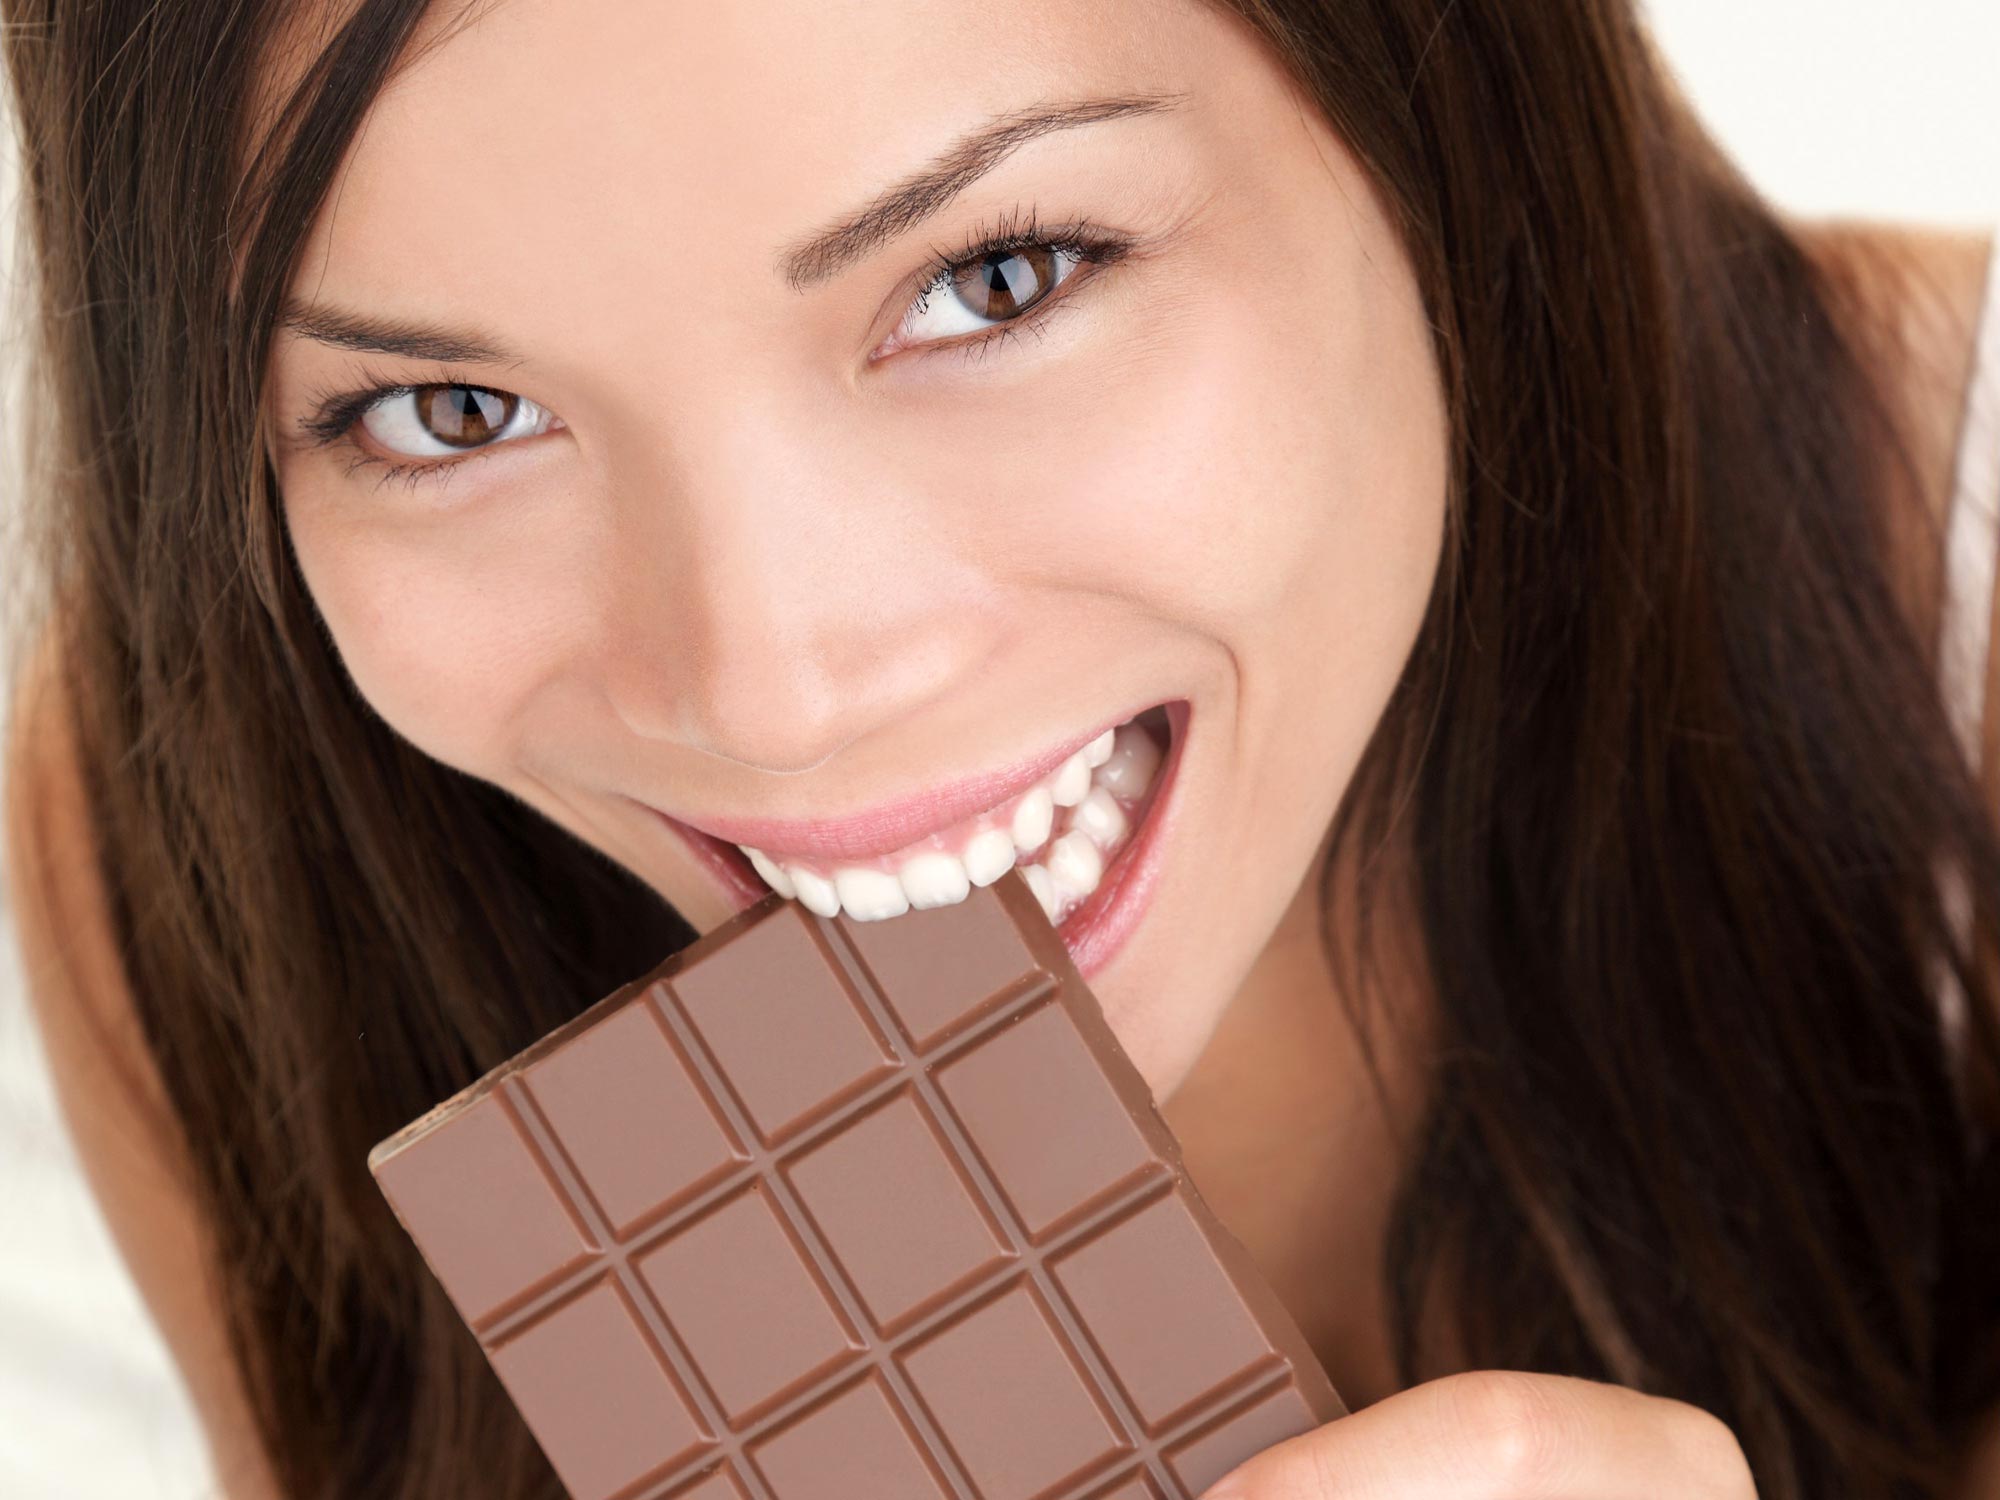 Happy woman eating a large chocolate bar